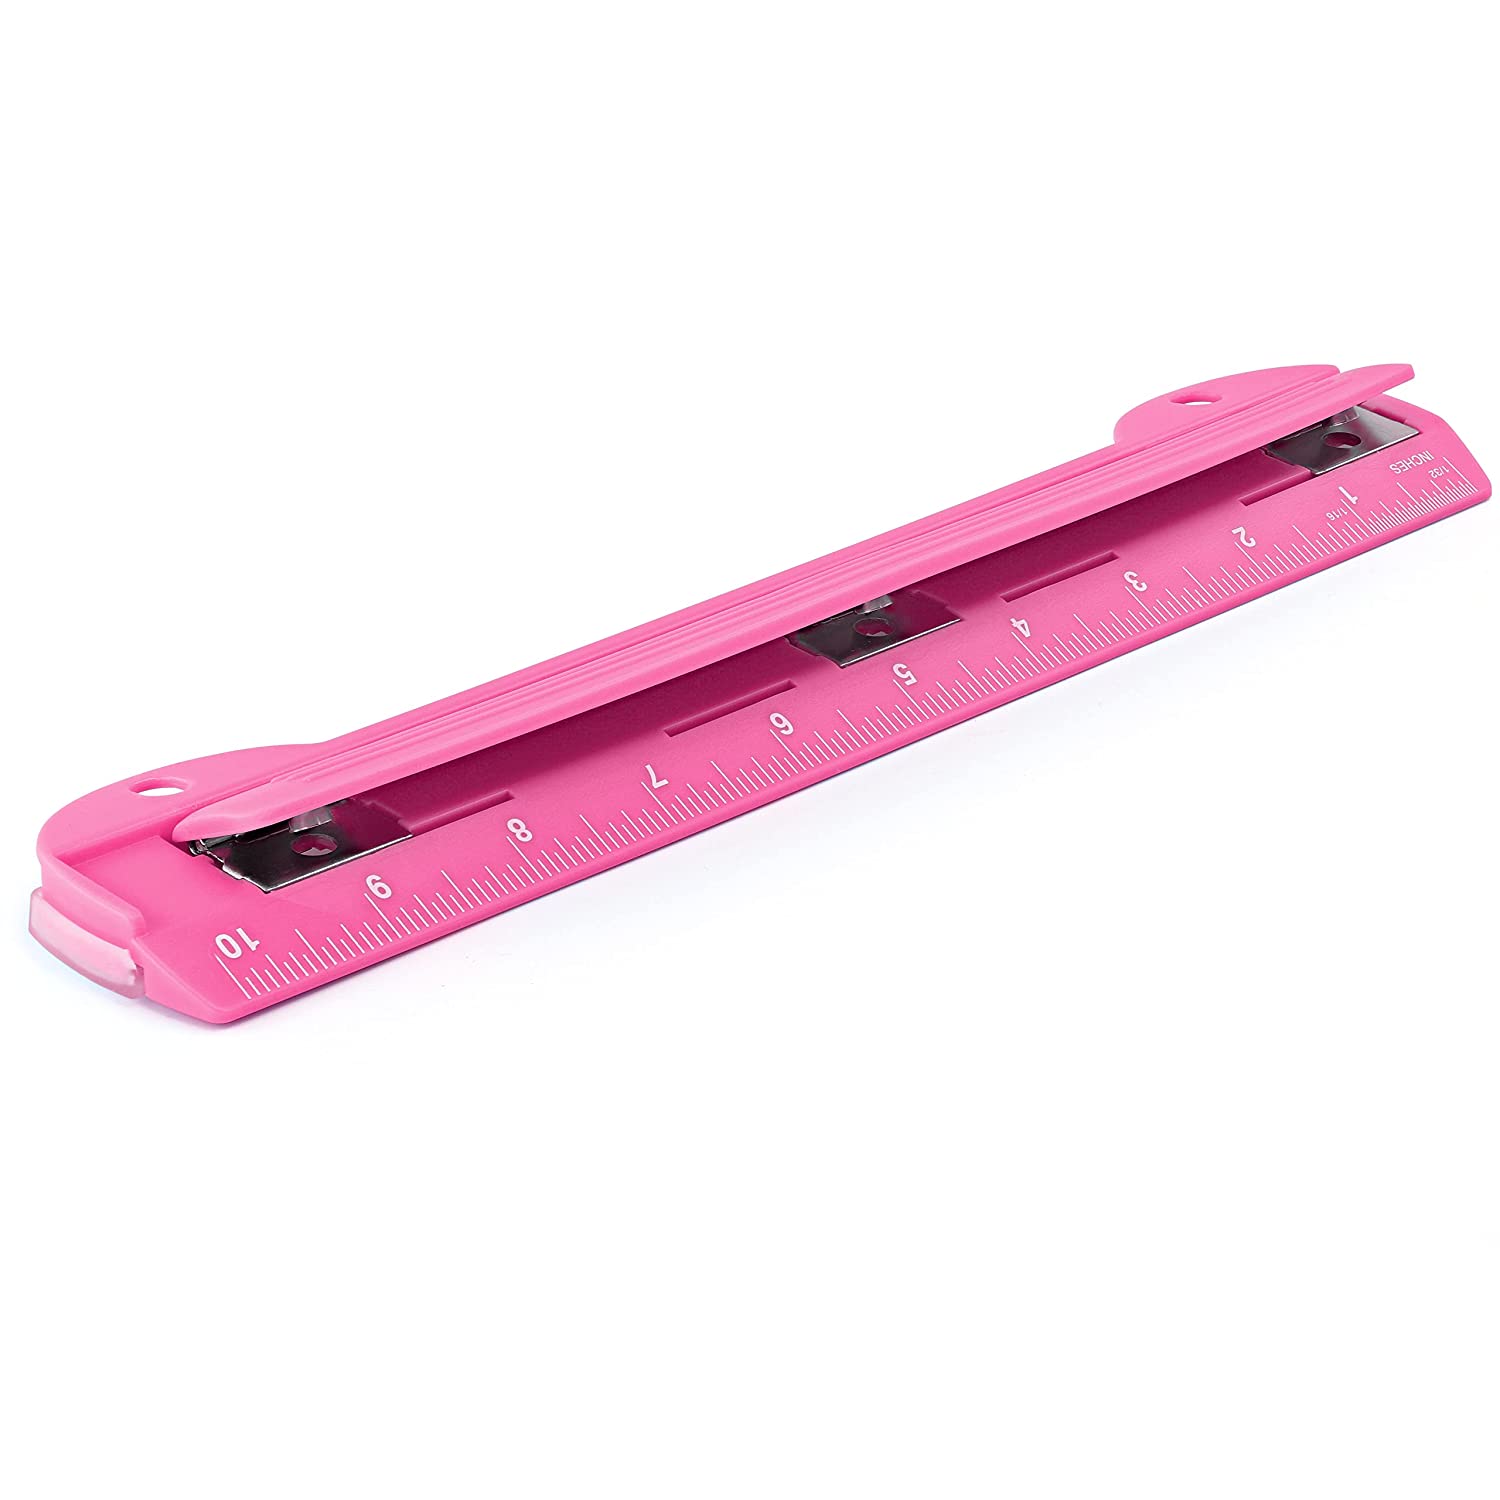 Portable 3-Hole Paper Punch pink – Enday